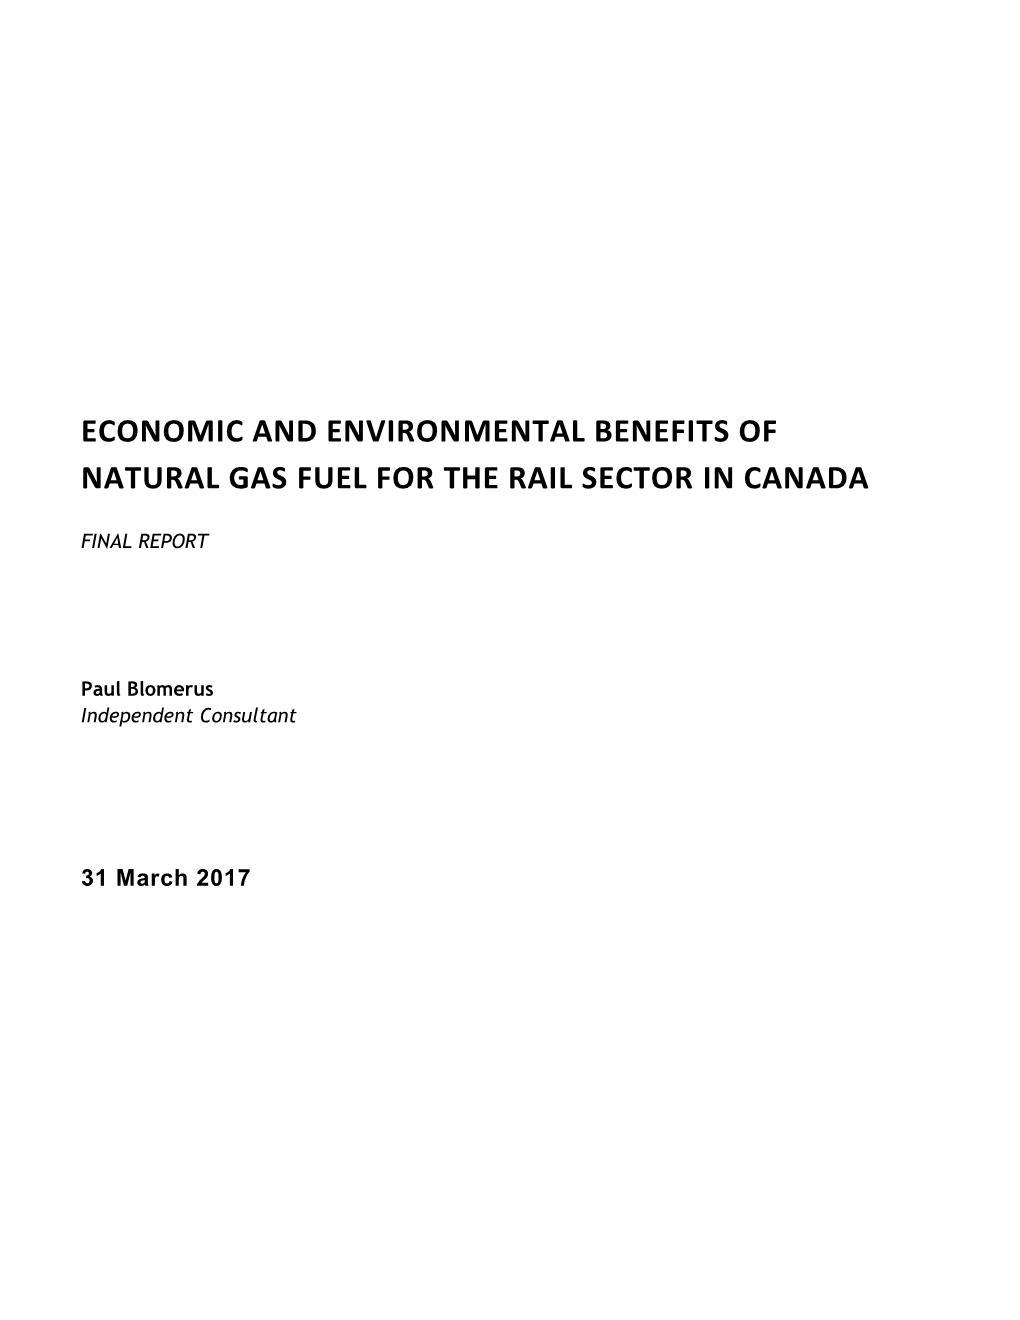 Economic and Environmental Benefits of Natural Gas Fuel for the Rail Sector in Canada